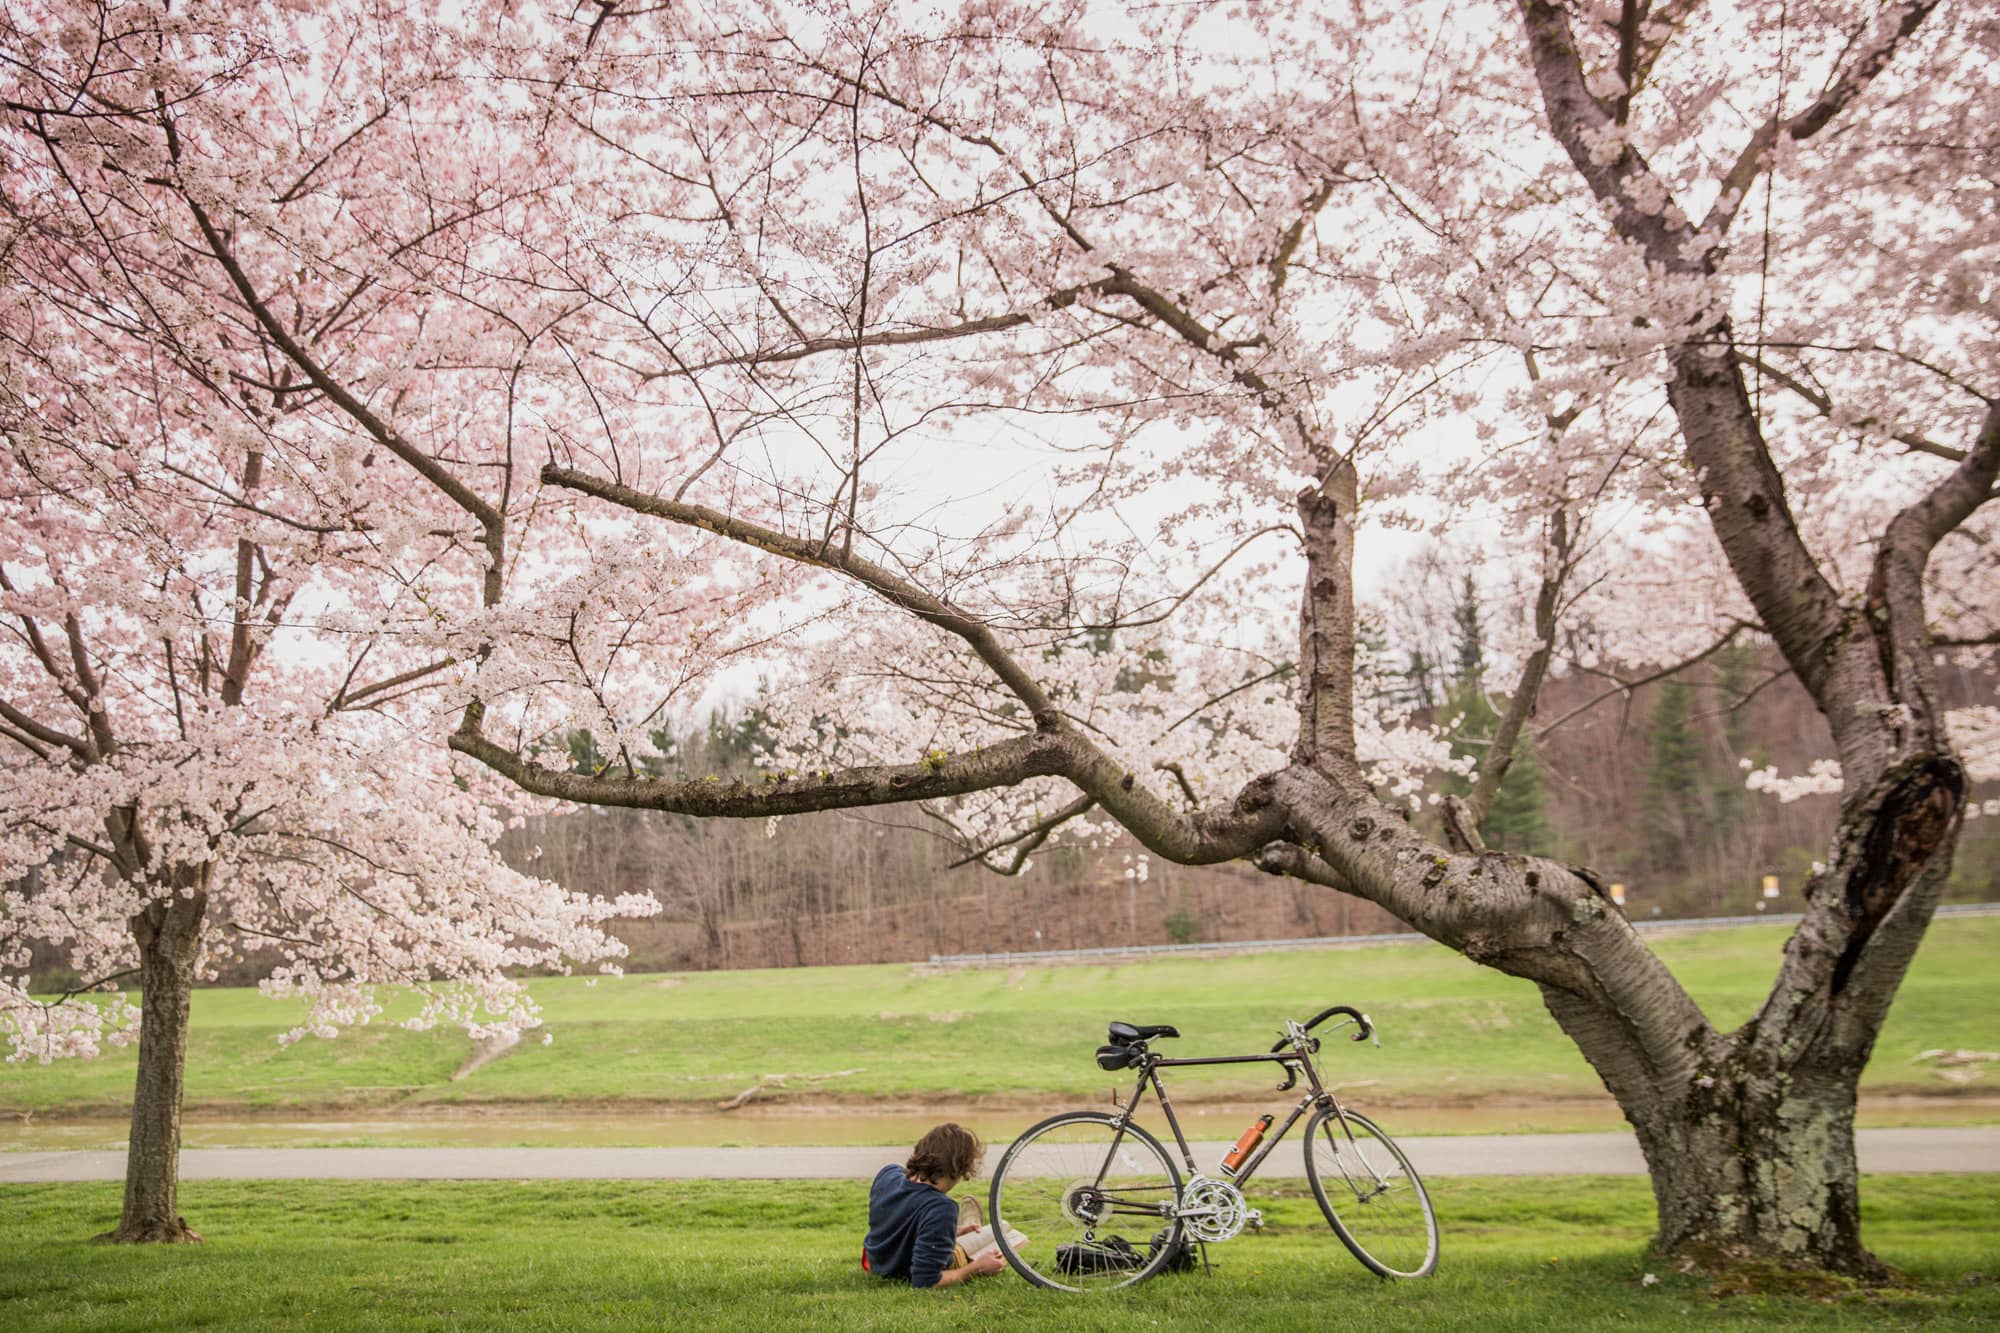 A cyclist on the Hockhocking Adena Bikeway that spans from Athens to Nelsonville, Ohio, stops to enjoy the cherry blossoms in bloom along the banks of the Hocking River in Athens.